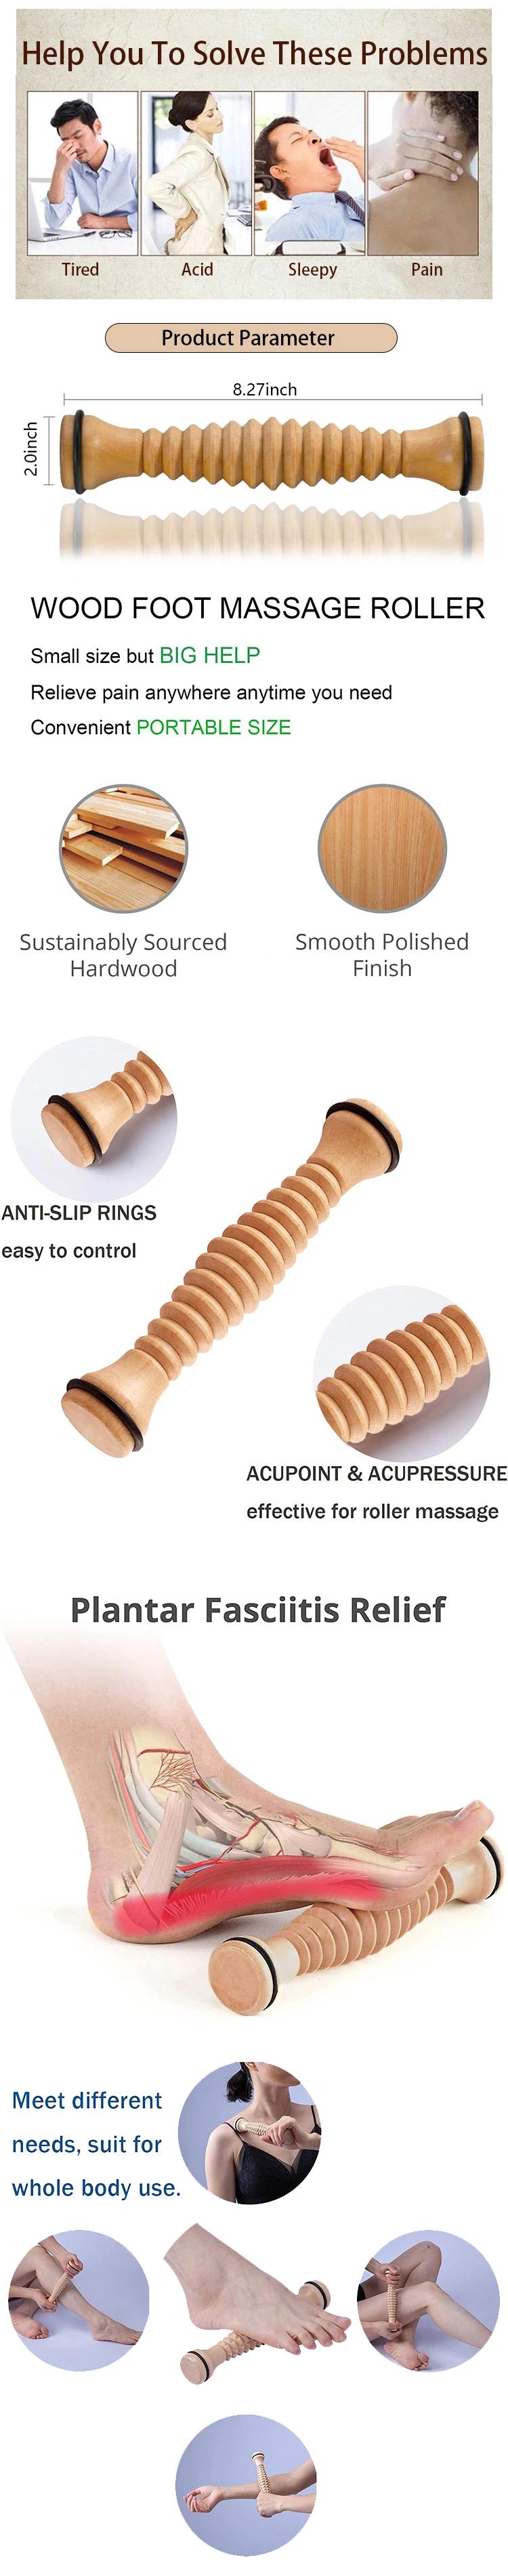 Handheld Wood Massage Roller Body Back Wooden Foot Roller Foot Massager for Relaxation